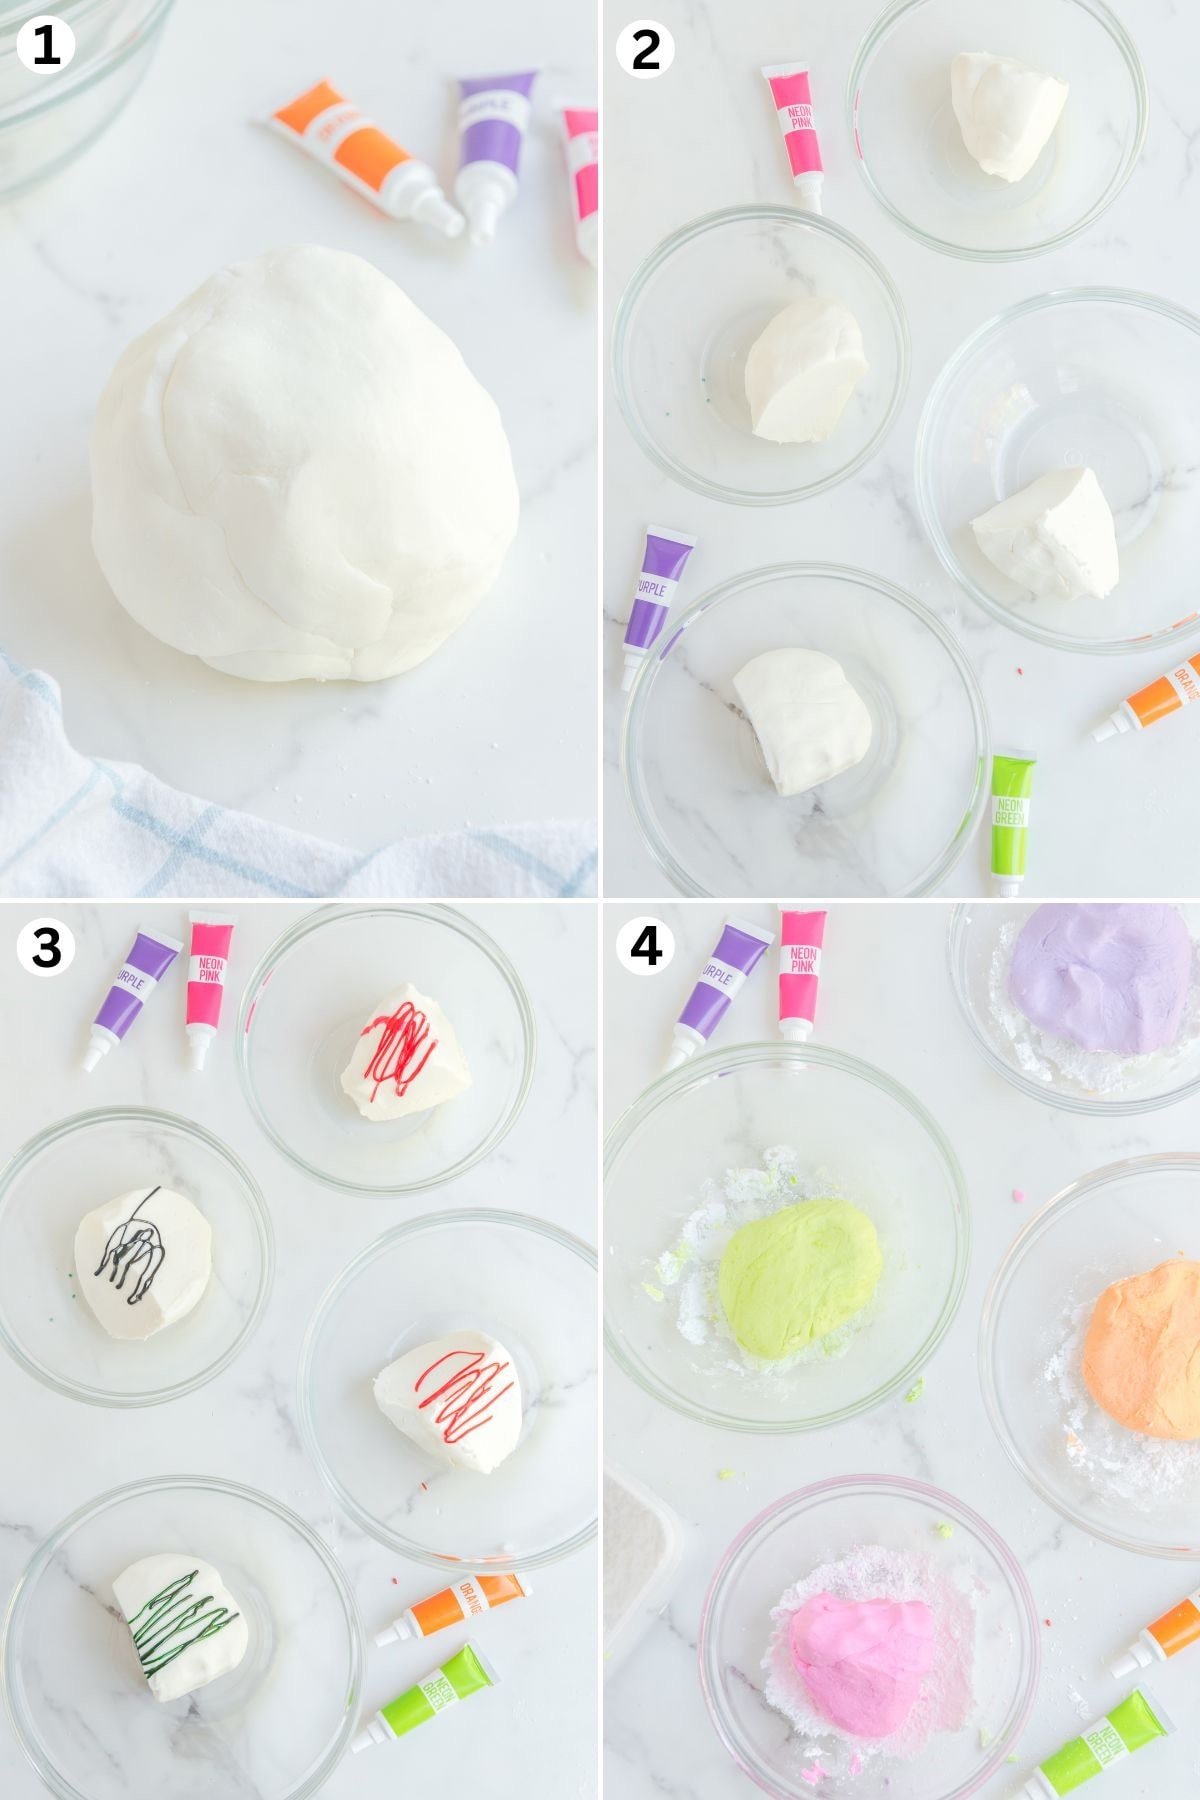 mix ingredients and roll into a ball. divide into 4 smaller section and place in a bowl. add food coloring into each bowl. different color playdough in different bowls.